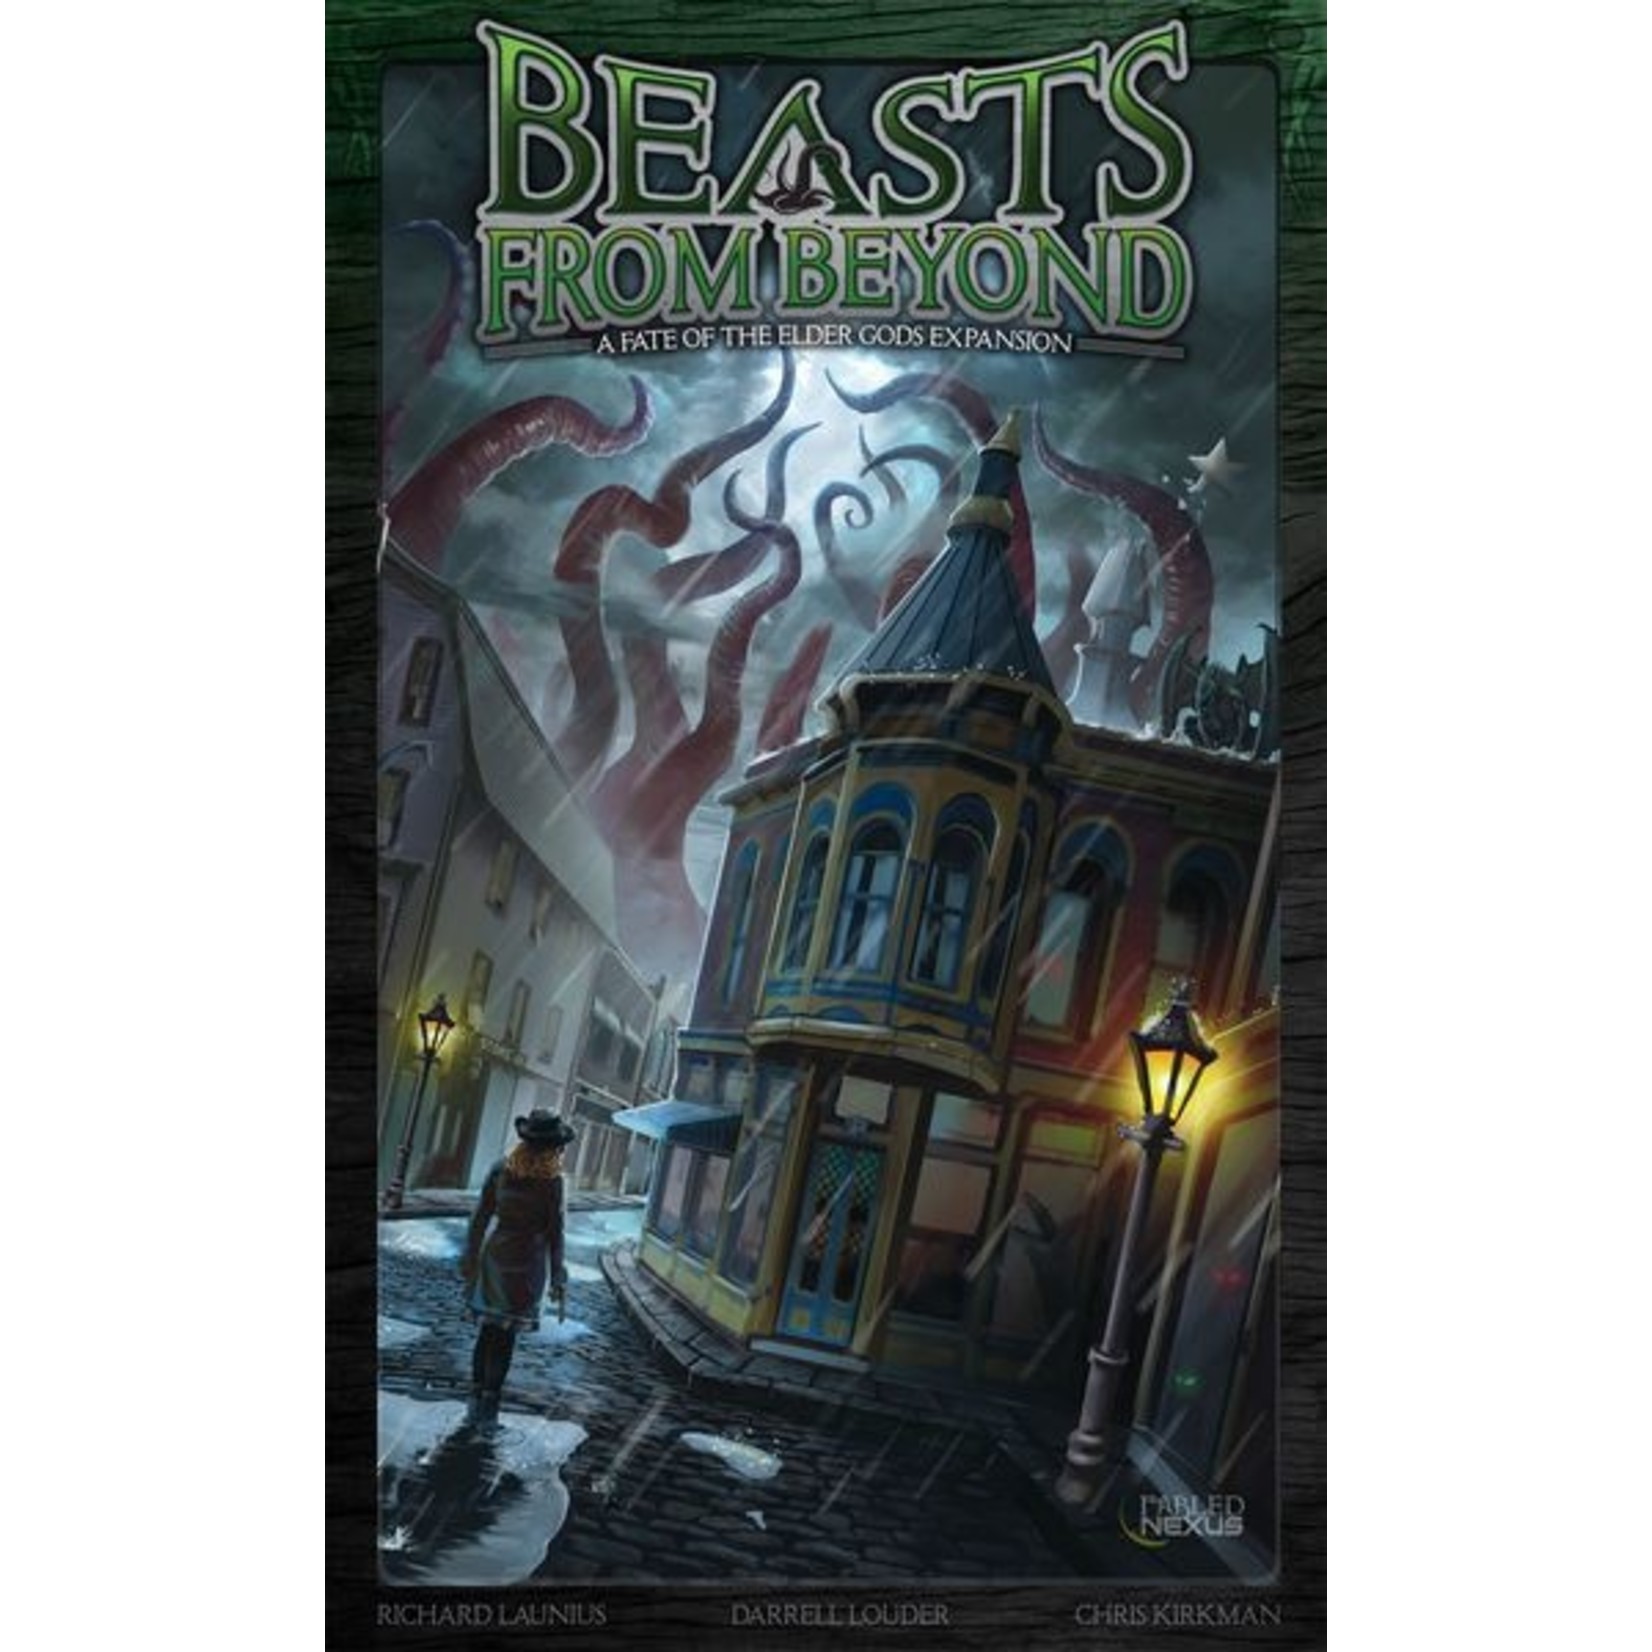 Beasts from Beyond